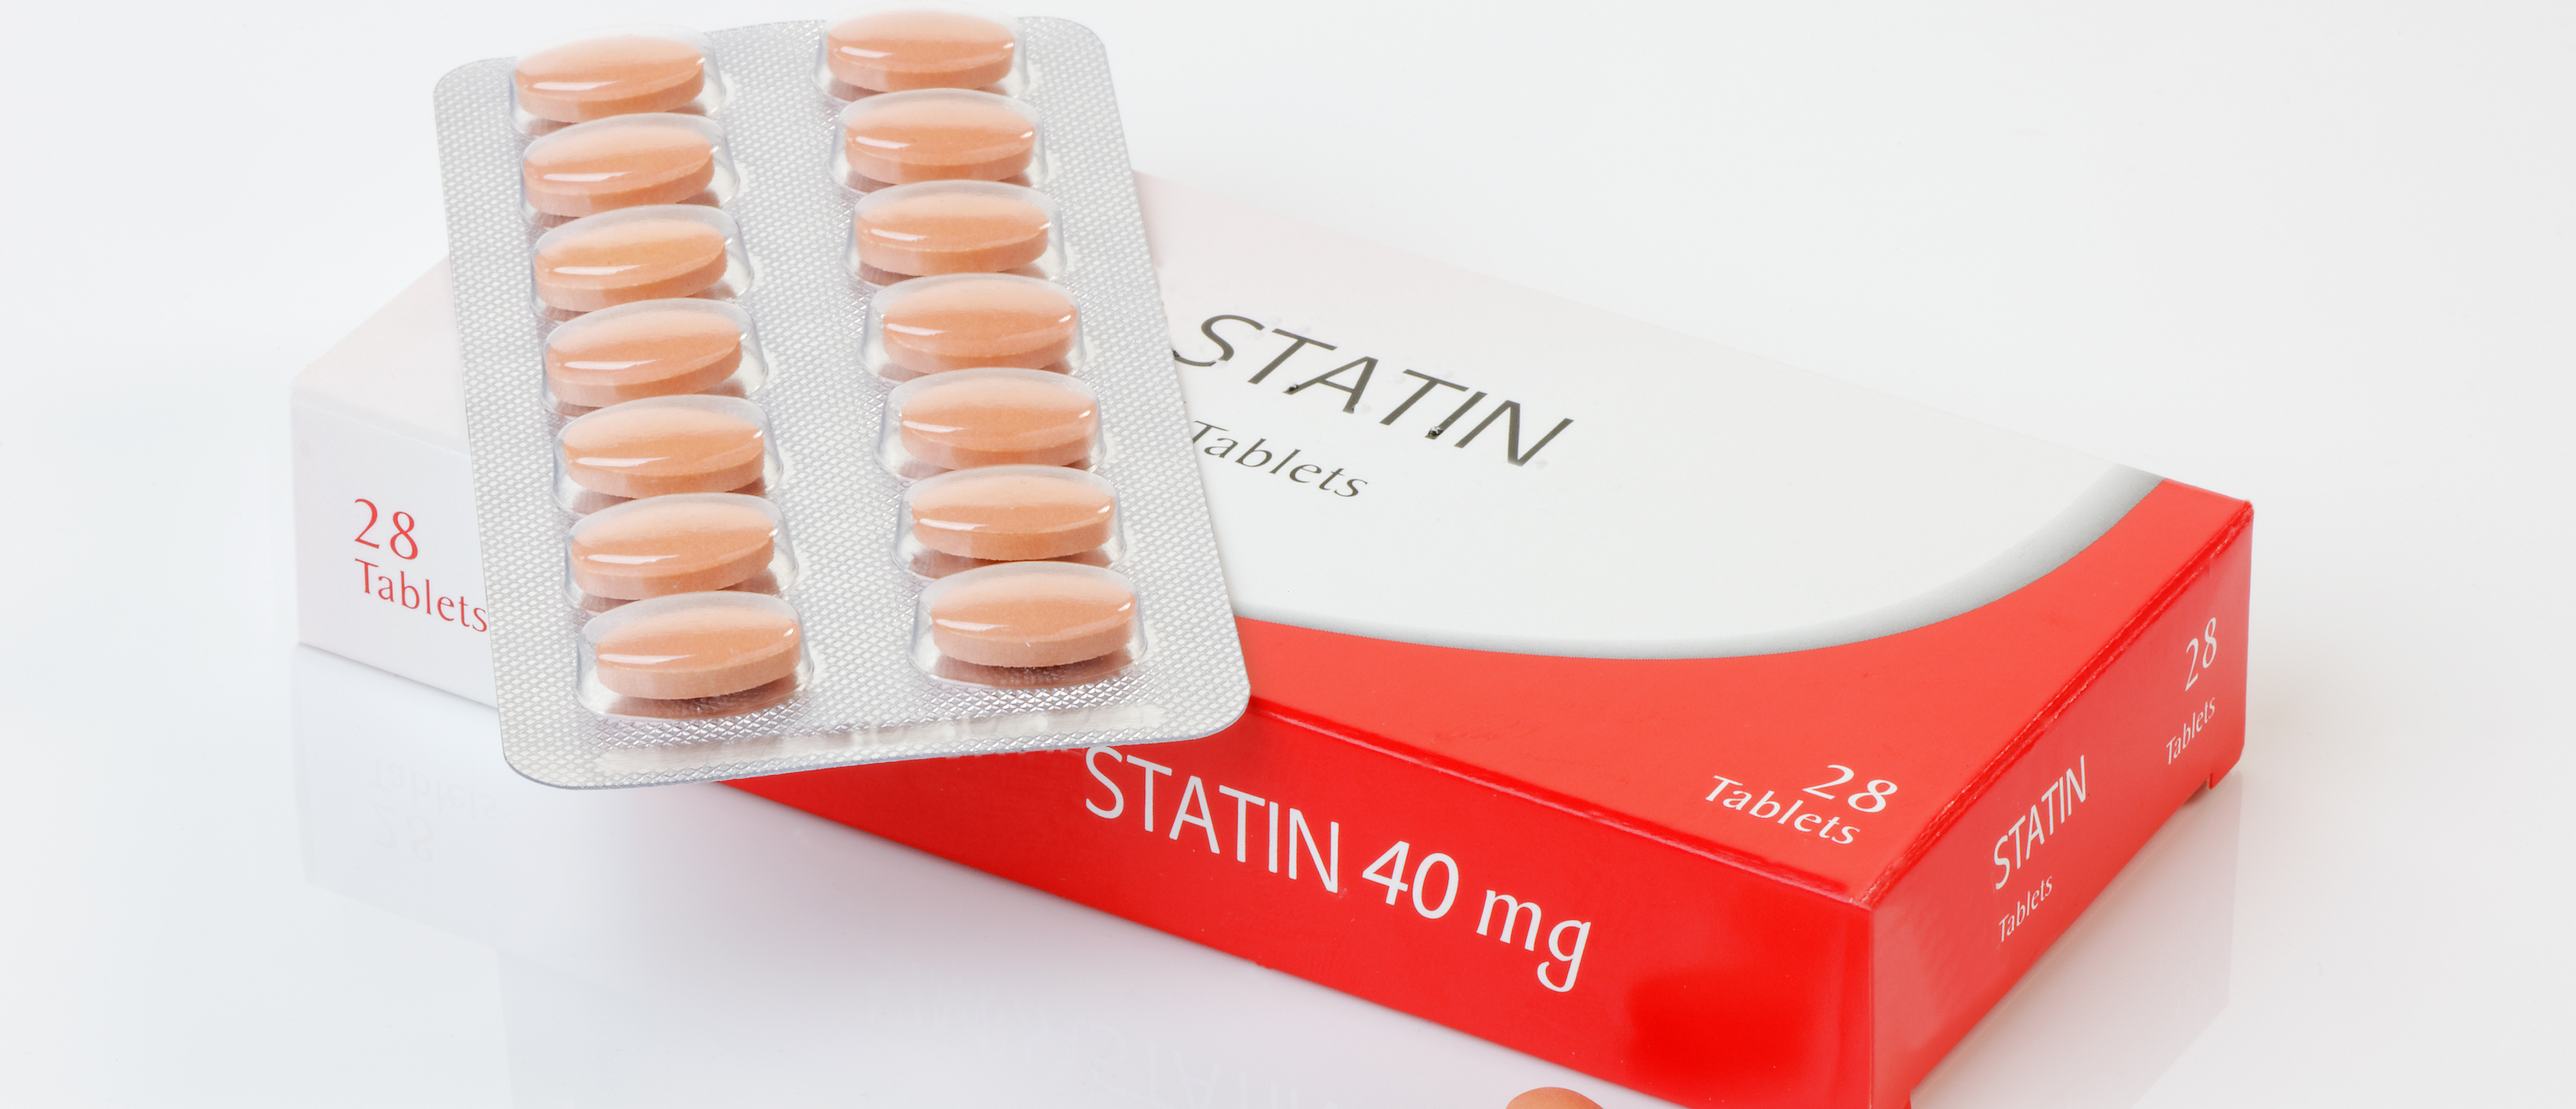 Statin is Linked to Low Incidence of Breast Cancer and Death